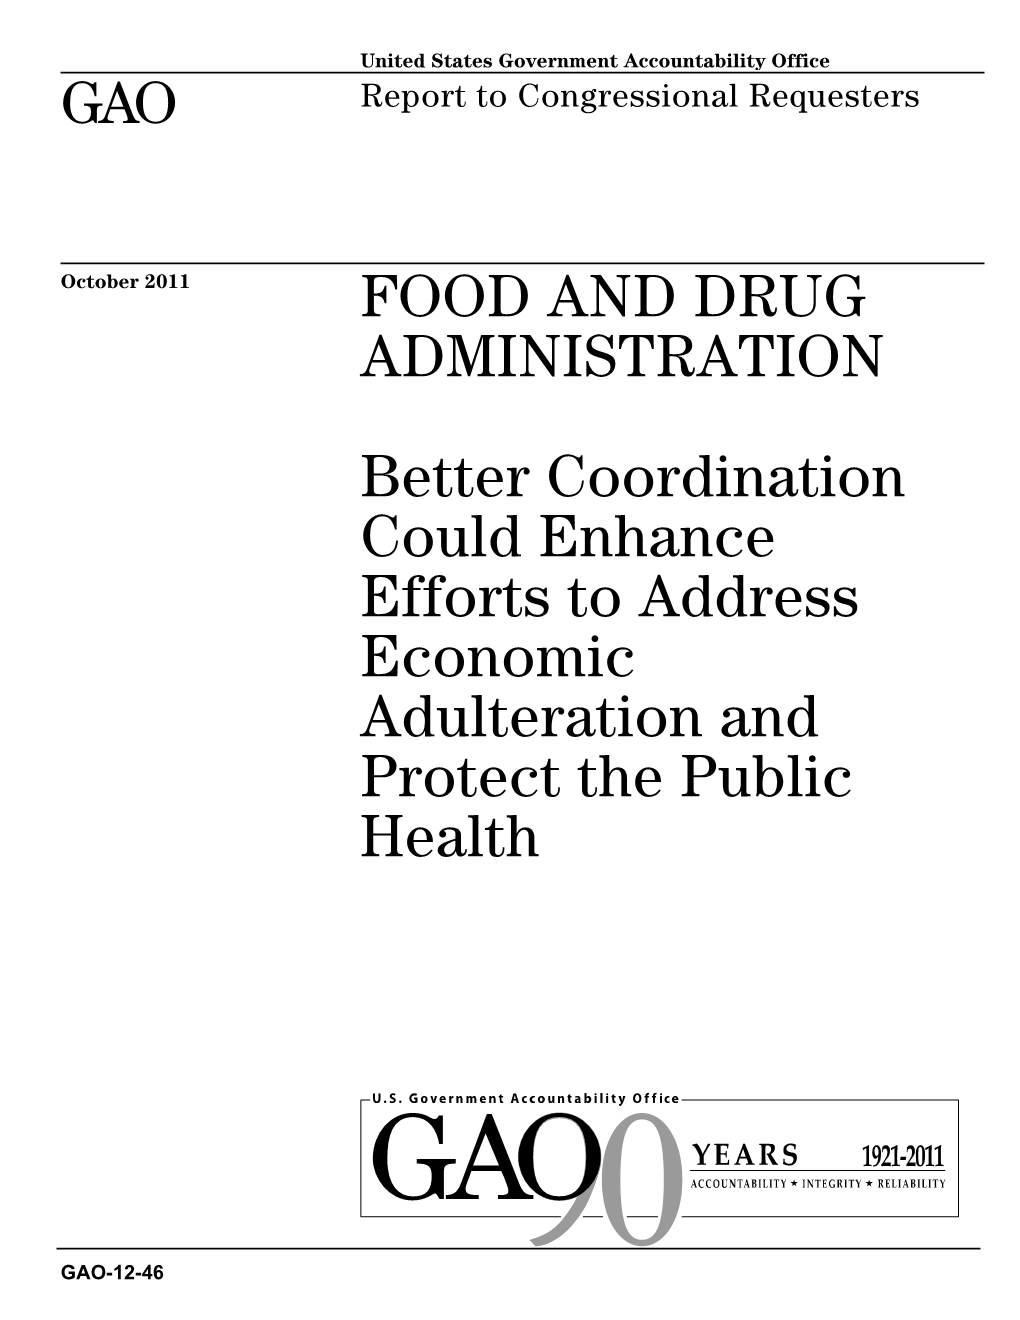 GAO-12-46 Food and Drug Administration: Better Coordination